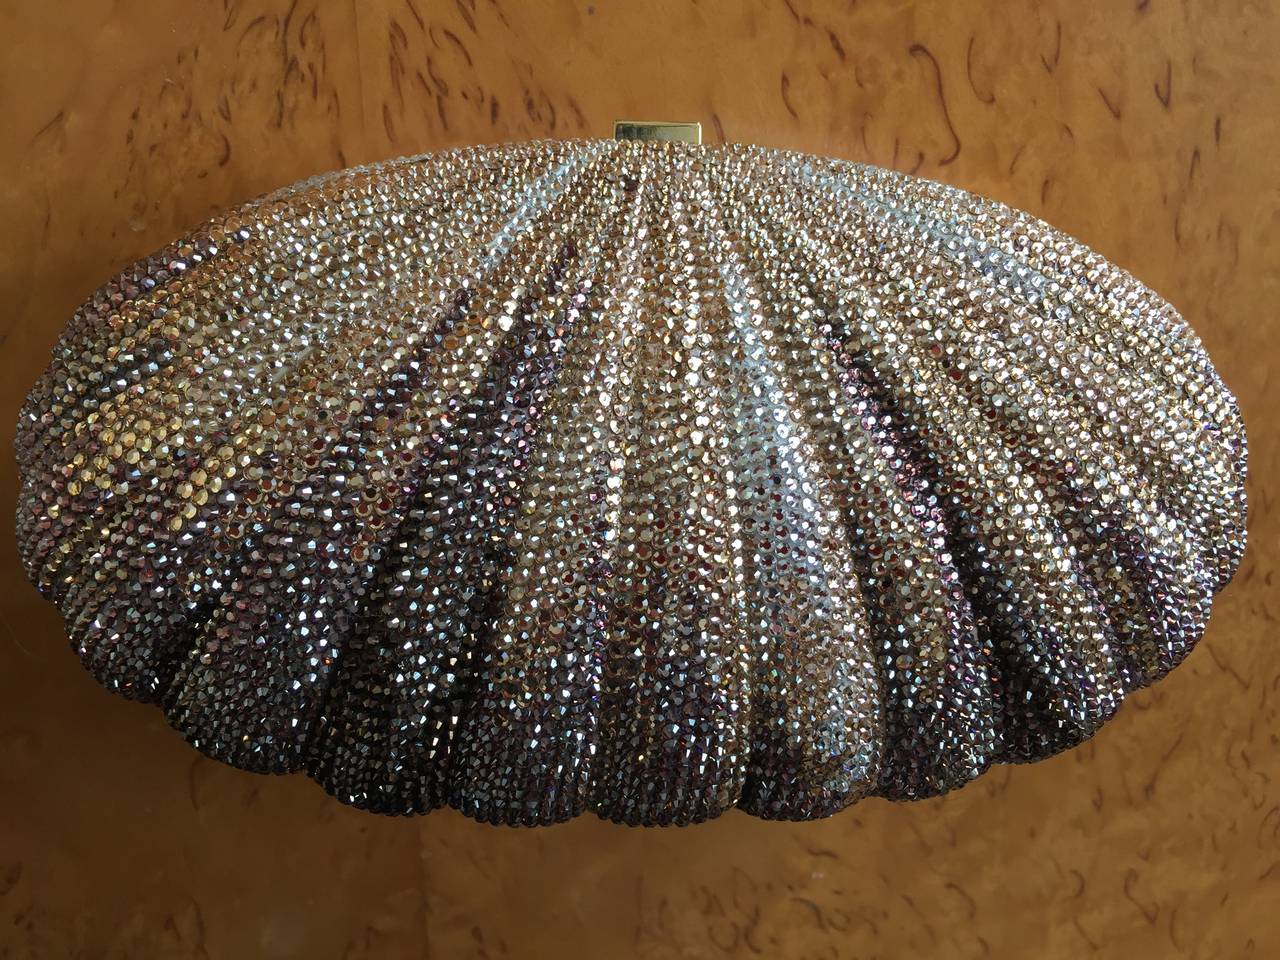 Judith Leiber lovely crystal shell minaudier in ombre shades of gray to gold.
Brand new , never worn in its box with tags , $3395.
Comes with all the acoutrements, still wrapped.
Exquisite and understated.